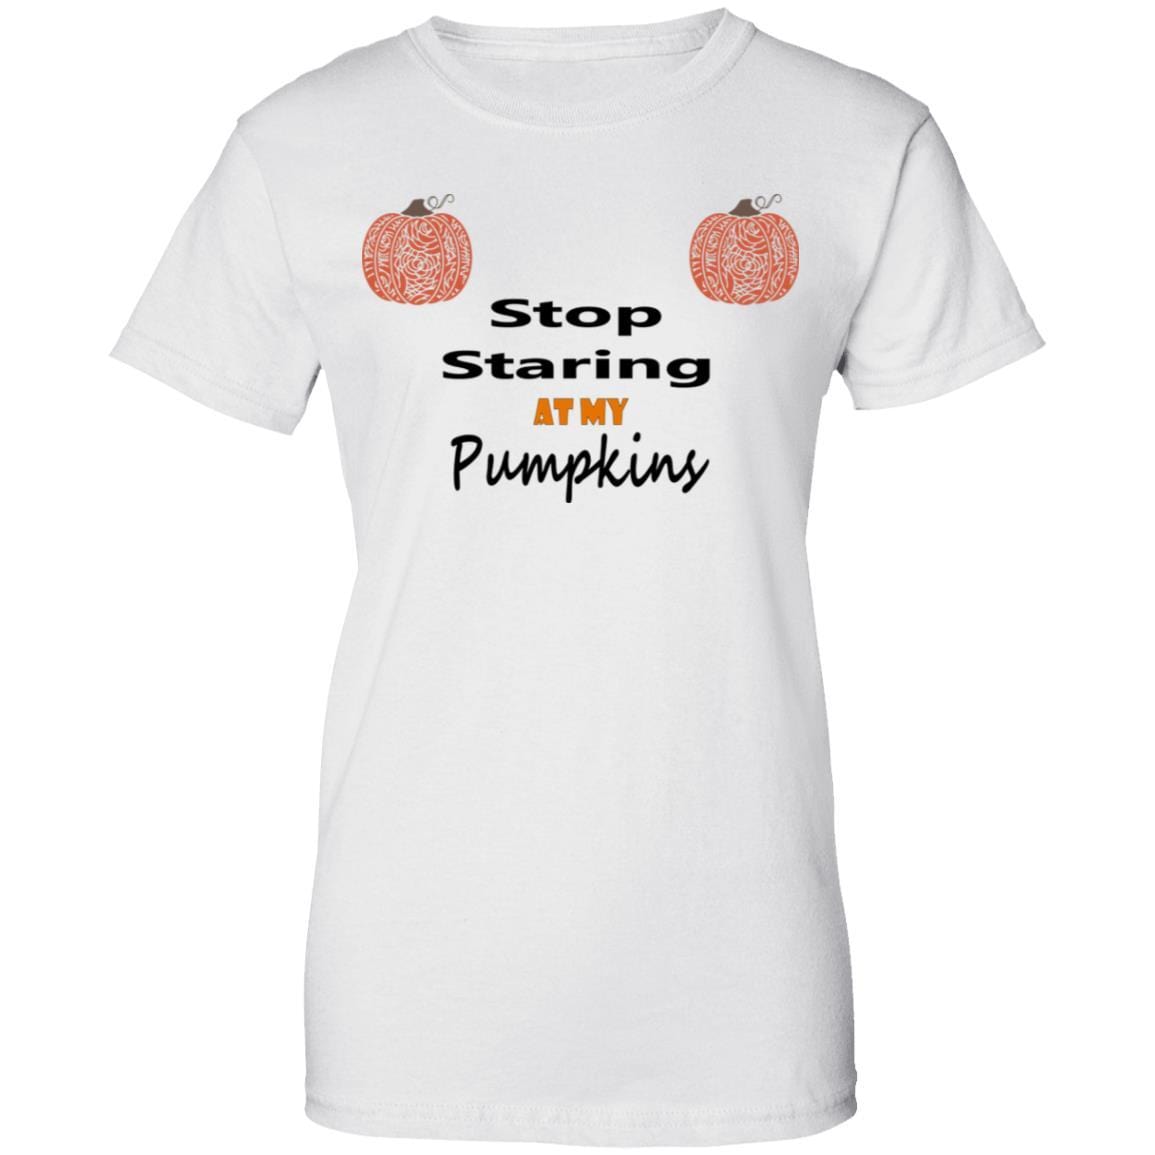 T-Shirts White / X-Small WineyBitches.Co "Stop Staring At My Pumpkins" Ladies' 100% Cotton T-Shirt WineyBitchesCo